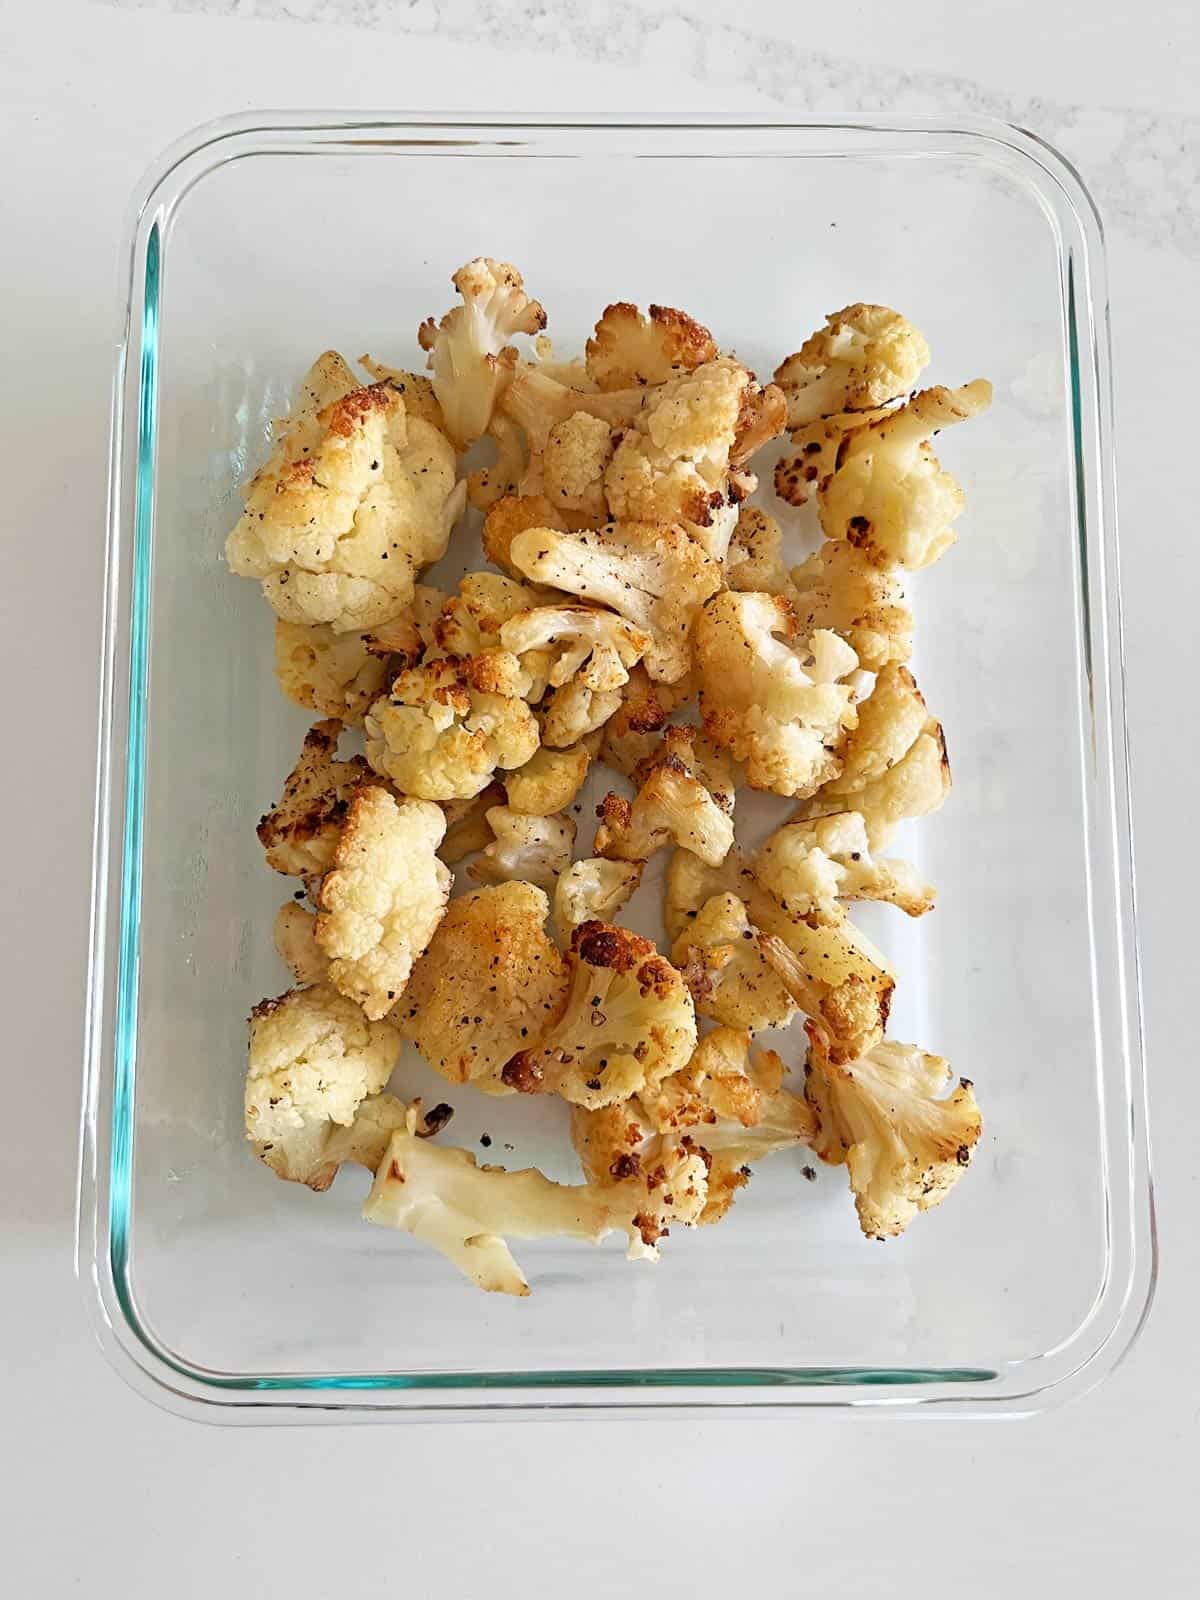 Roasted frozen cauliflower leftovers in a glass container.